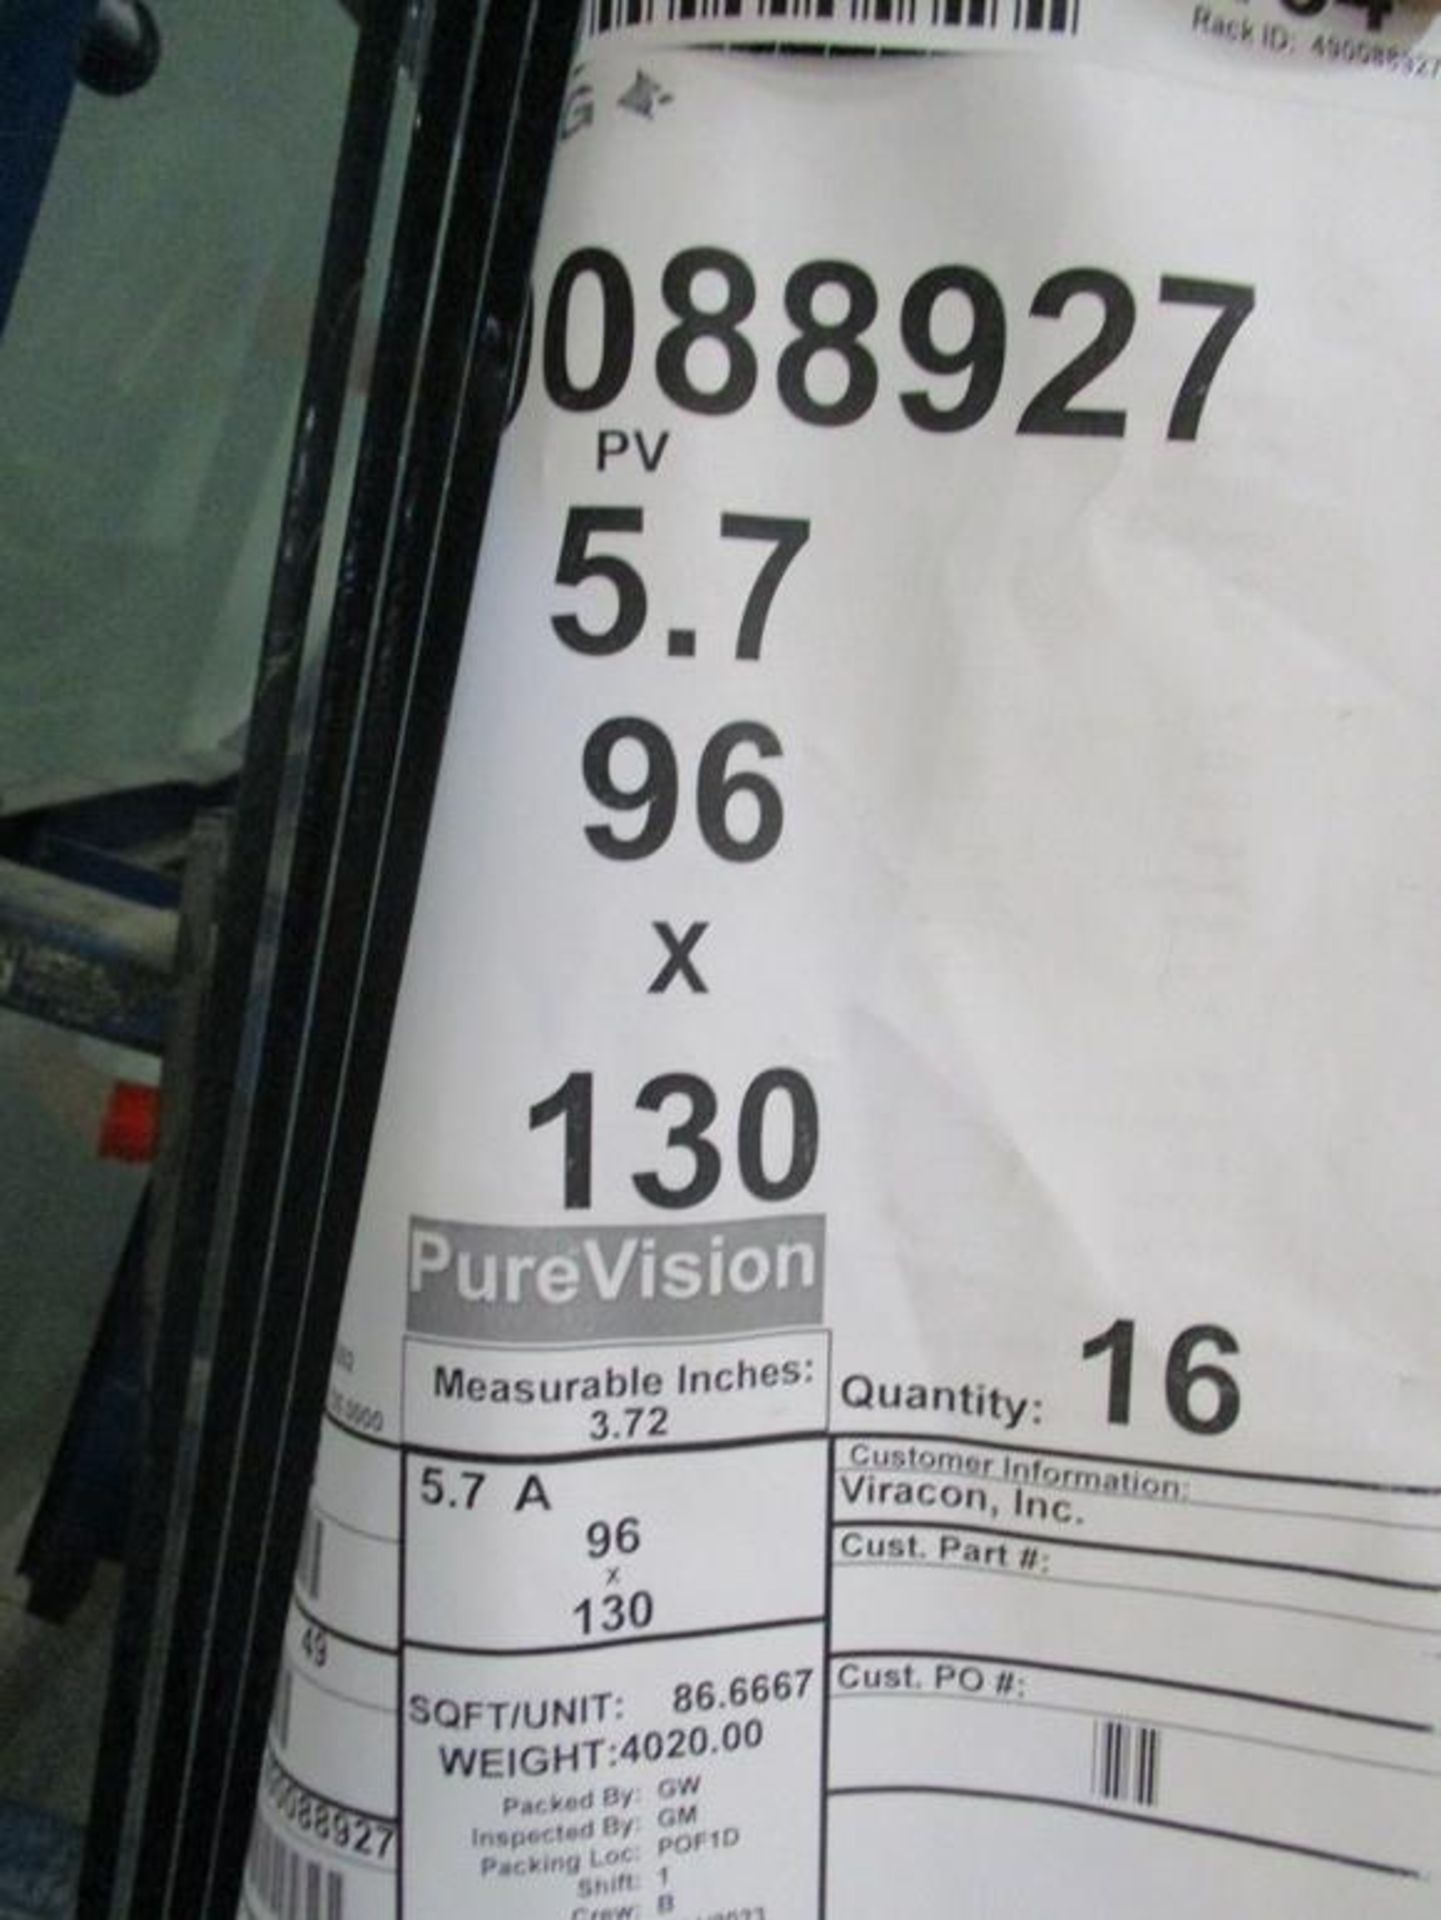 (16) PV5.7 96" X 130" GLASS SHEET & (4) 96" X 130" VARIOUS THICKNESS (NO RACK) - Image 5 of 5